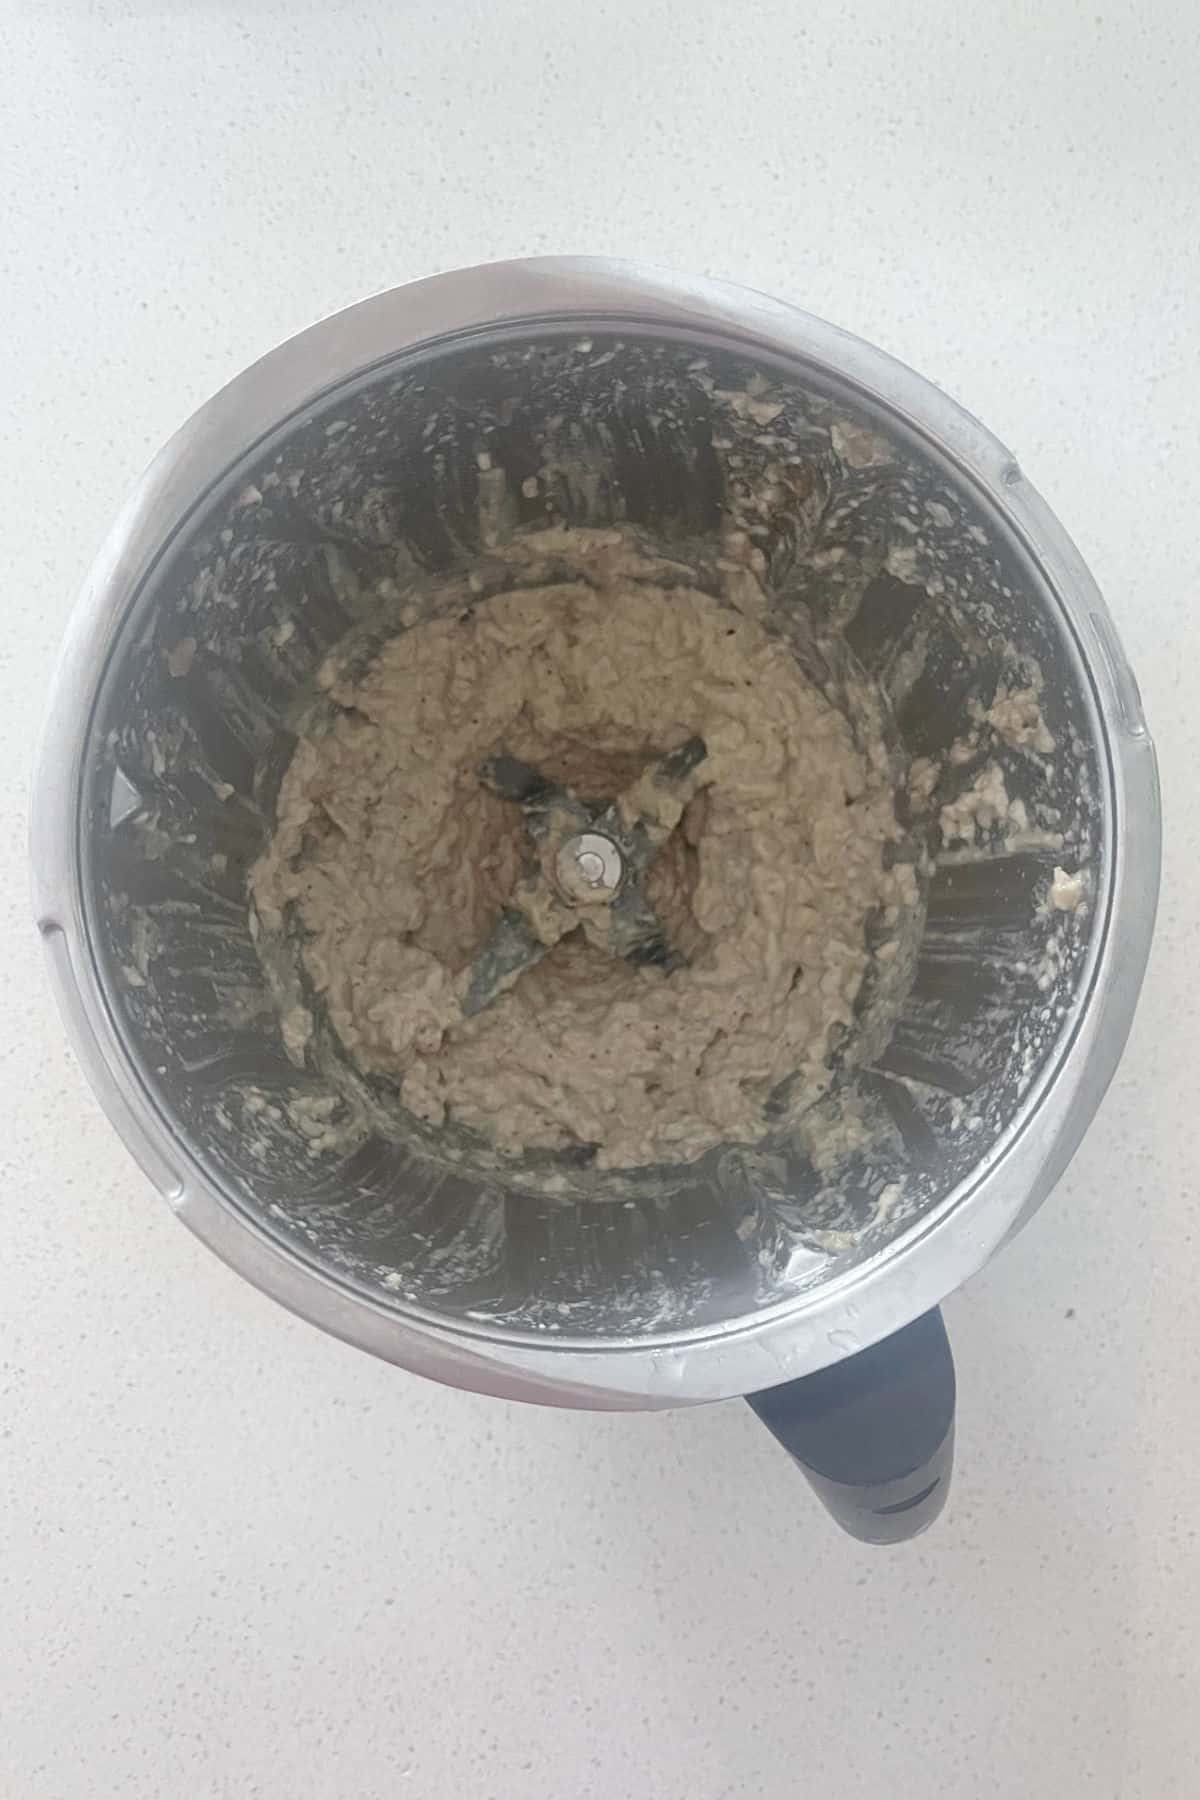 Baba Ghanoush Ingredients mixed in a thermomix bowl.